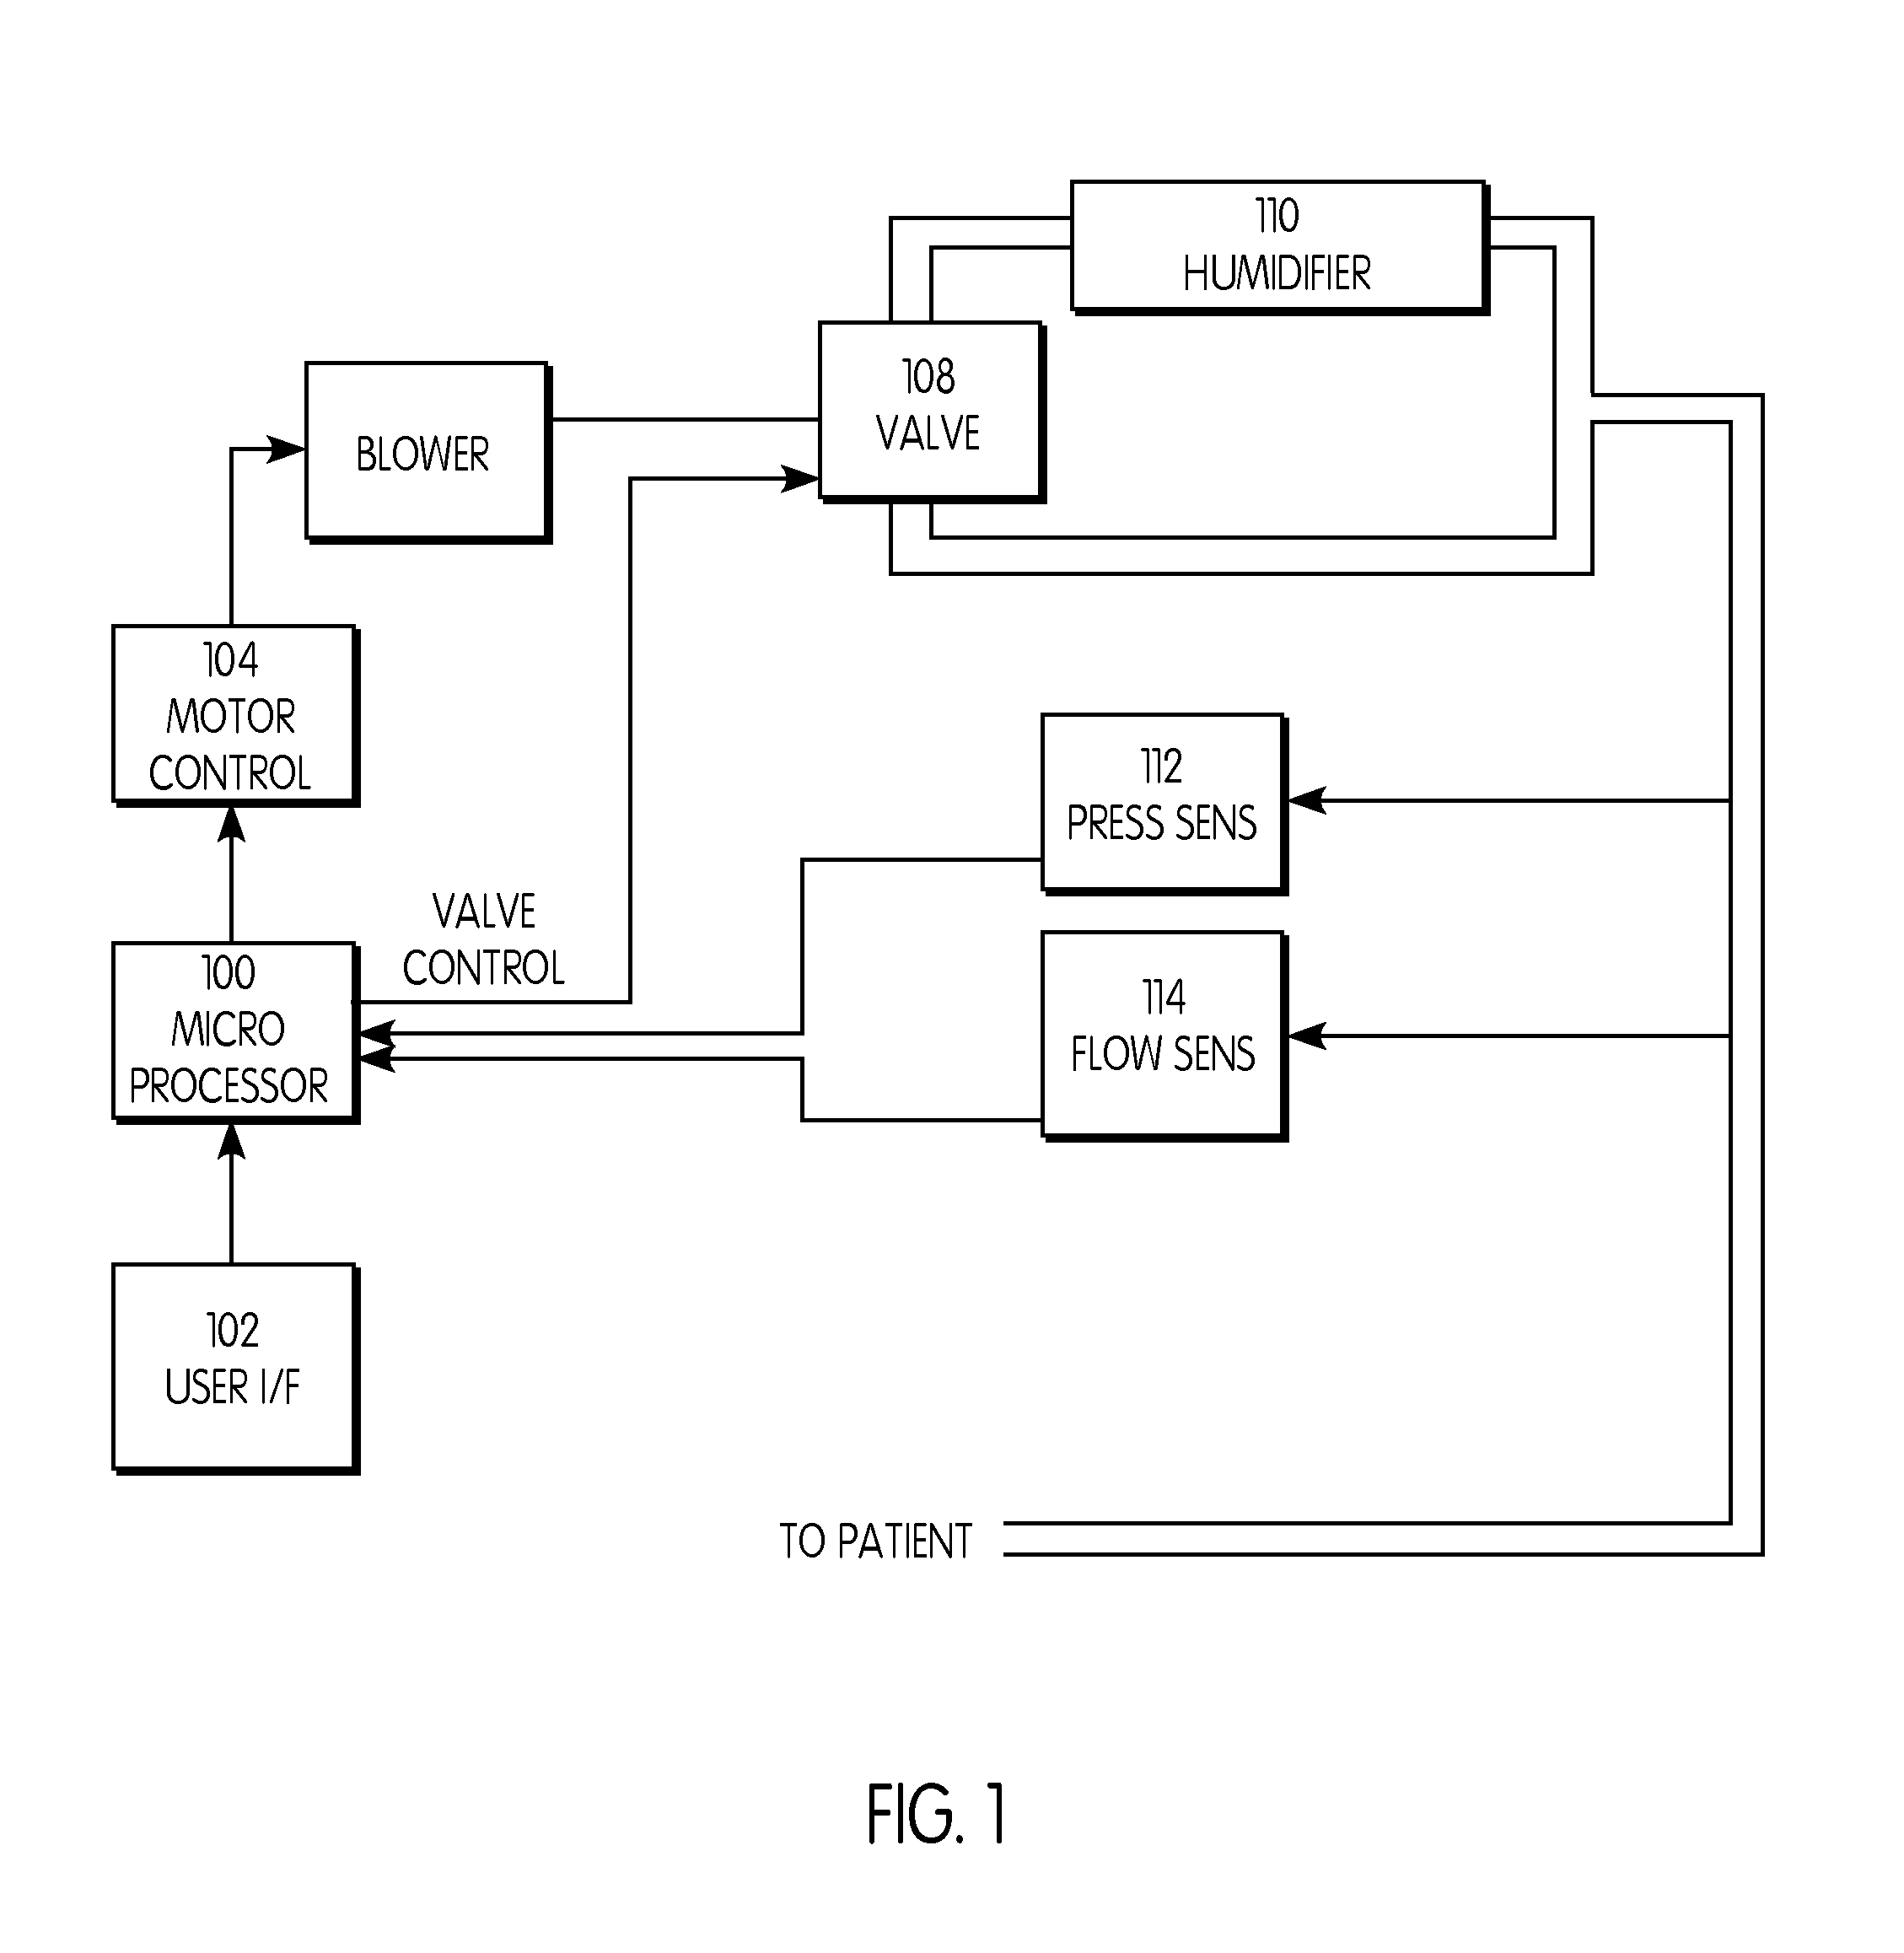 Method And Apparatus For Controlling The Delivery Of Humidified Air